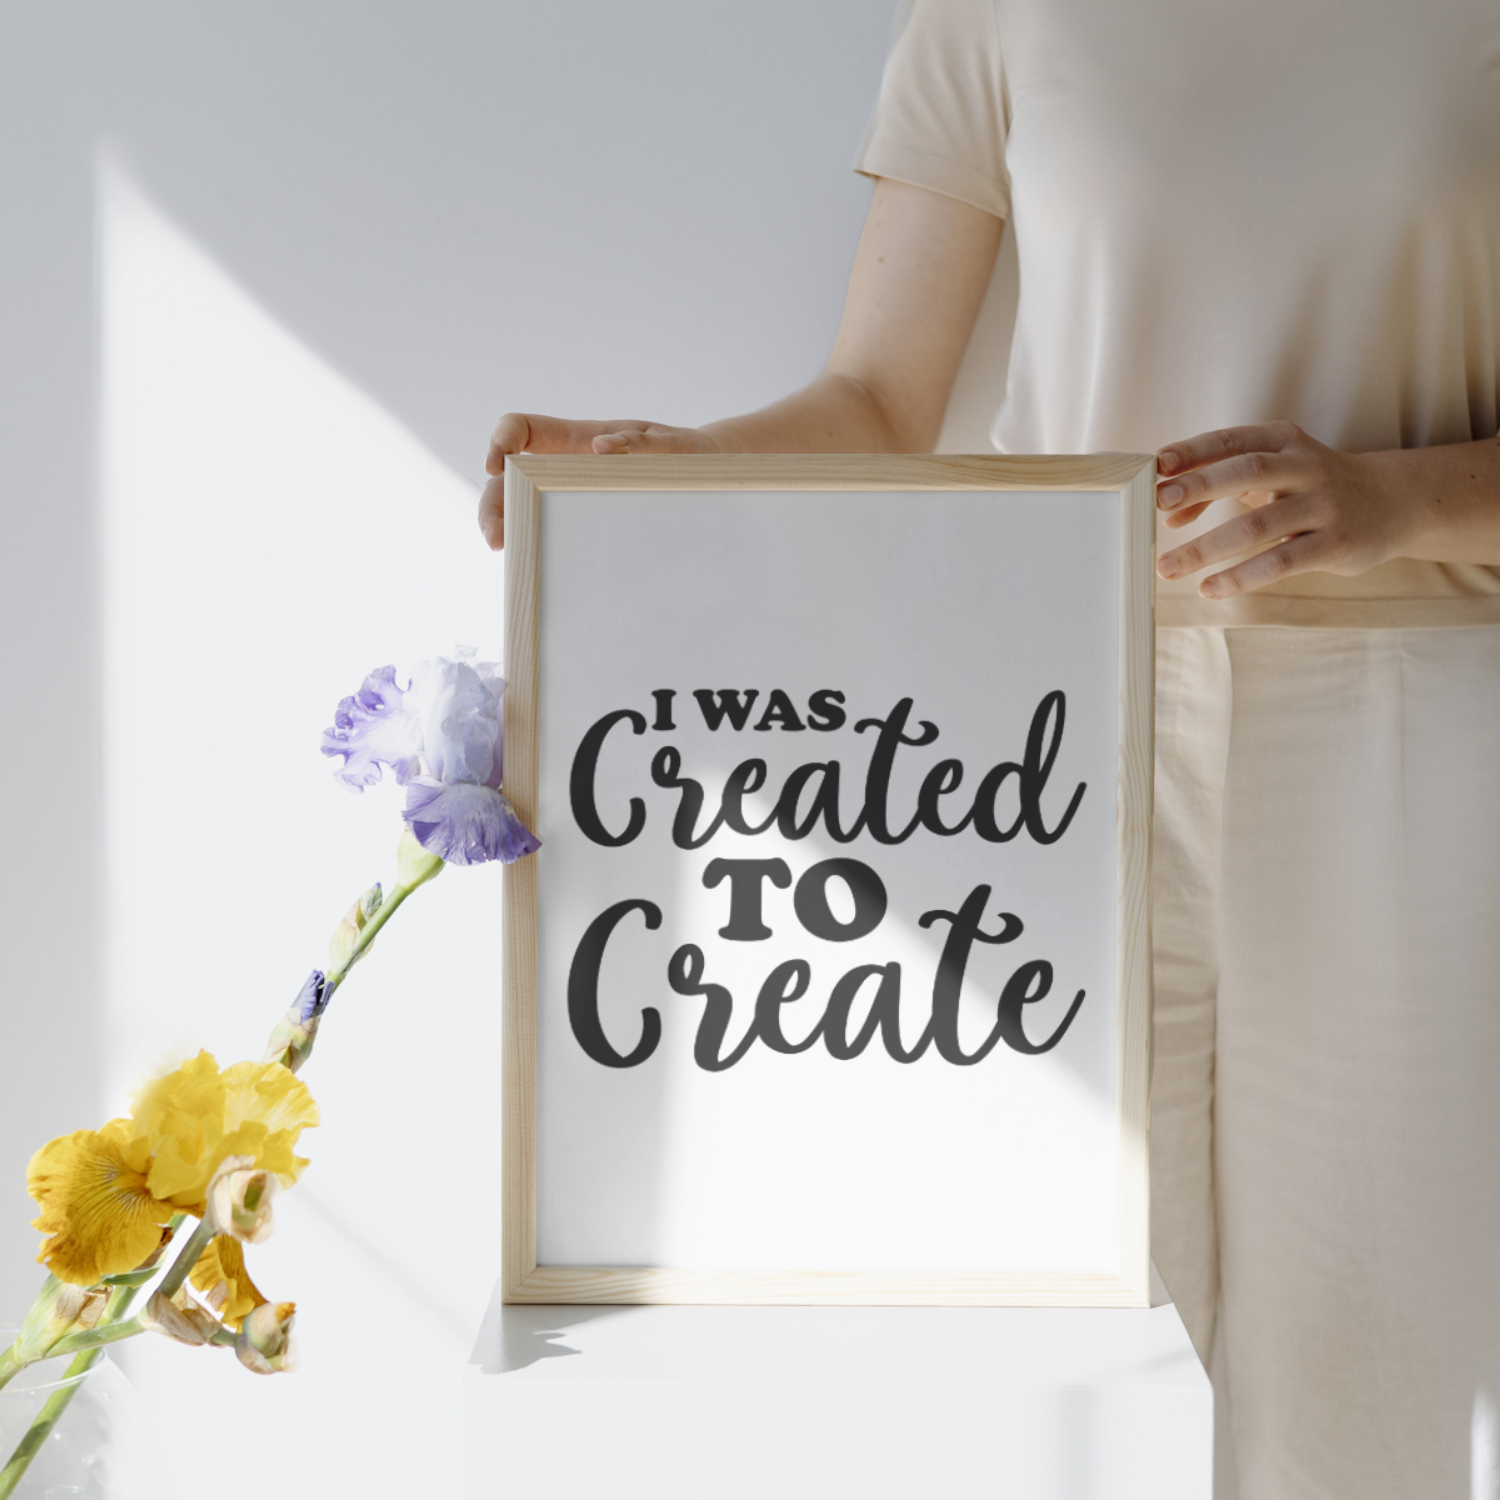 I WAS CREATED TO CREATE SVG | Digital Download | Cut File | SVG